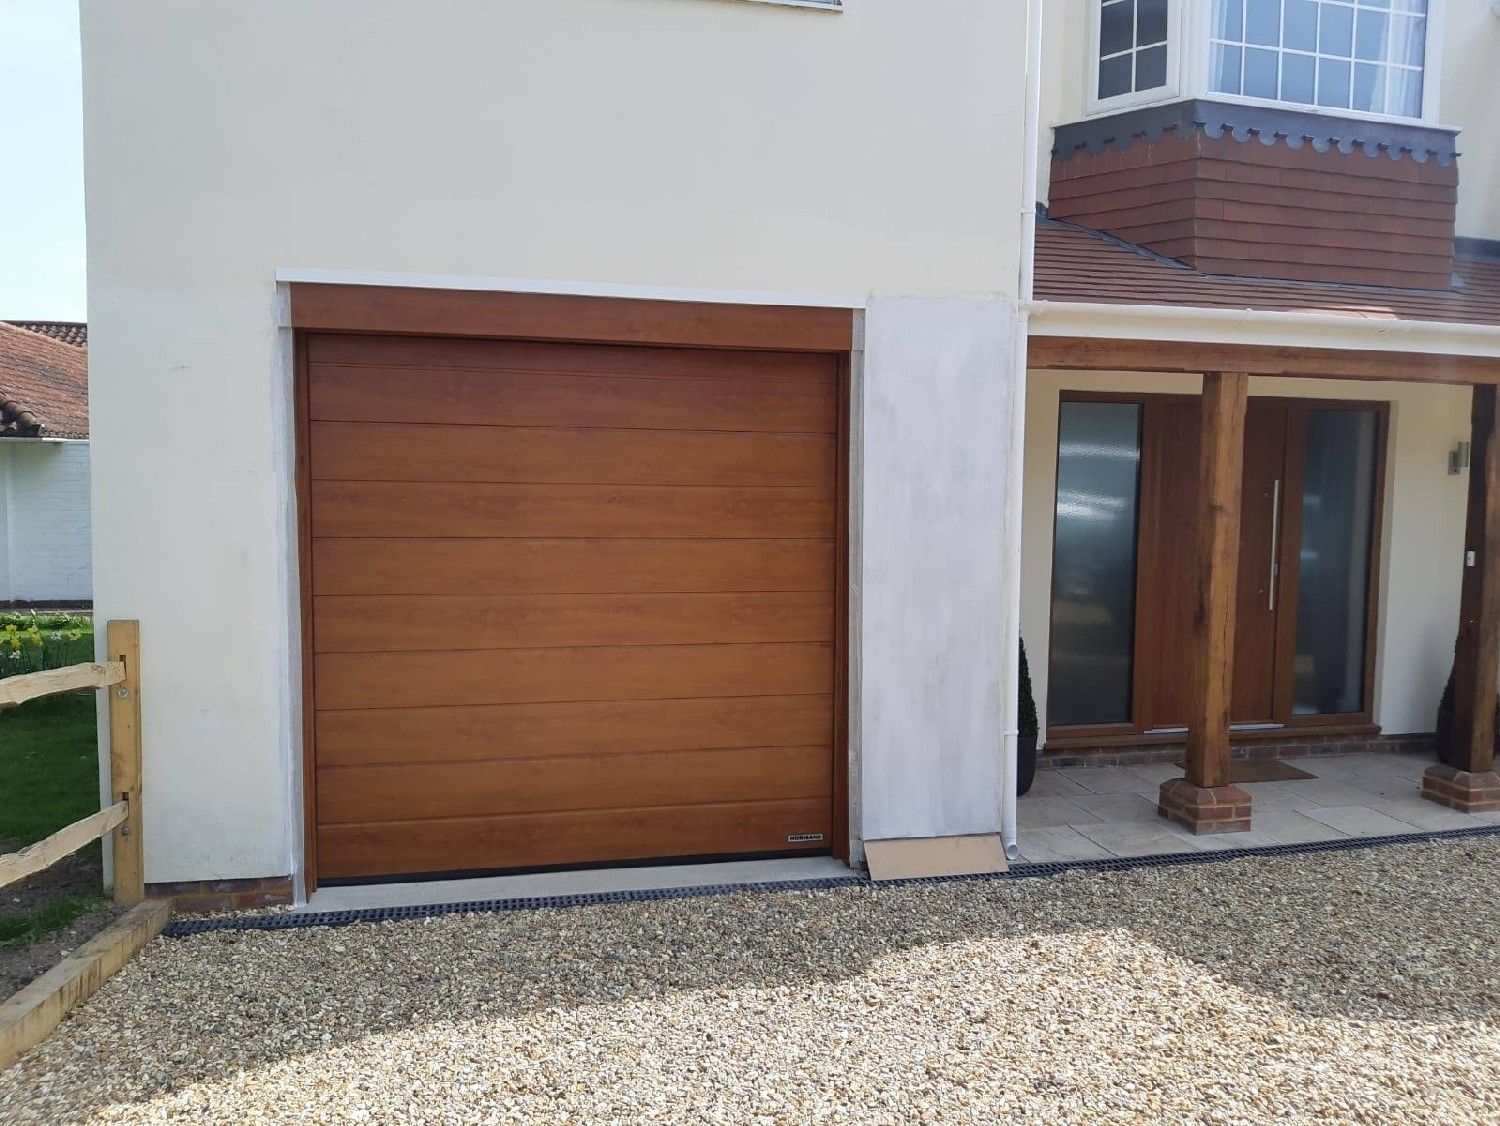 Unique Garage Door Suppliers And Fitters for Large Space